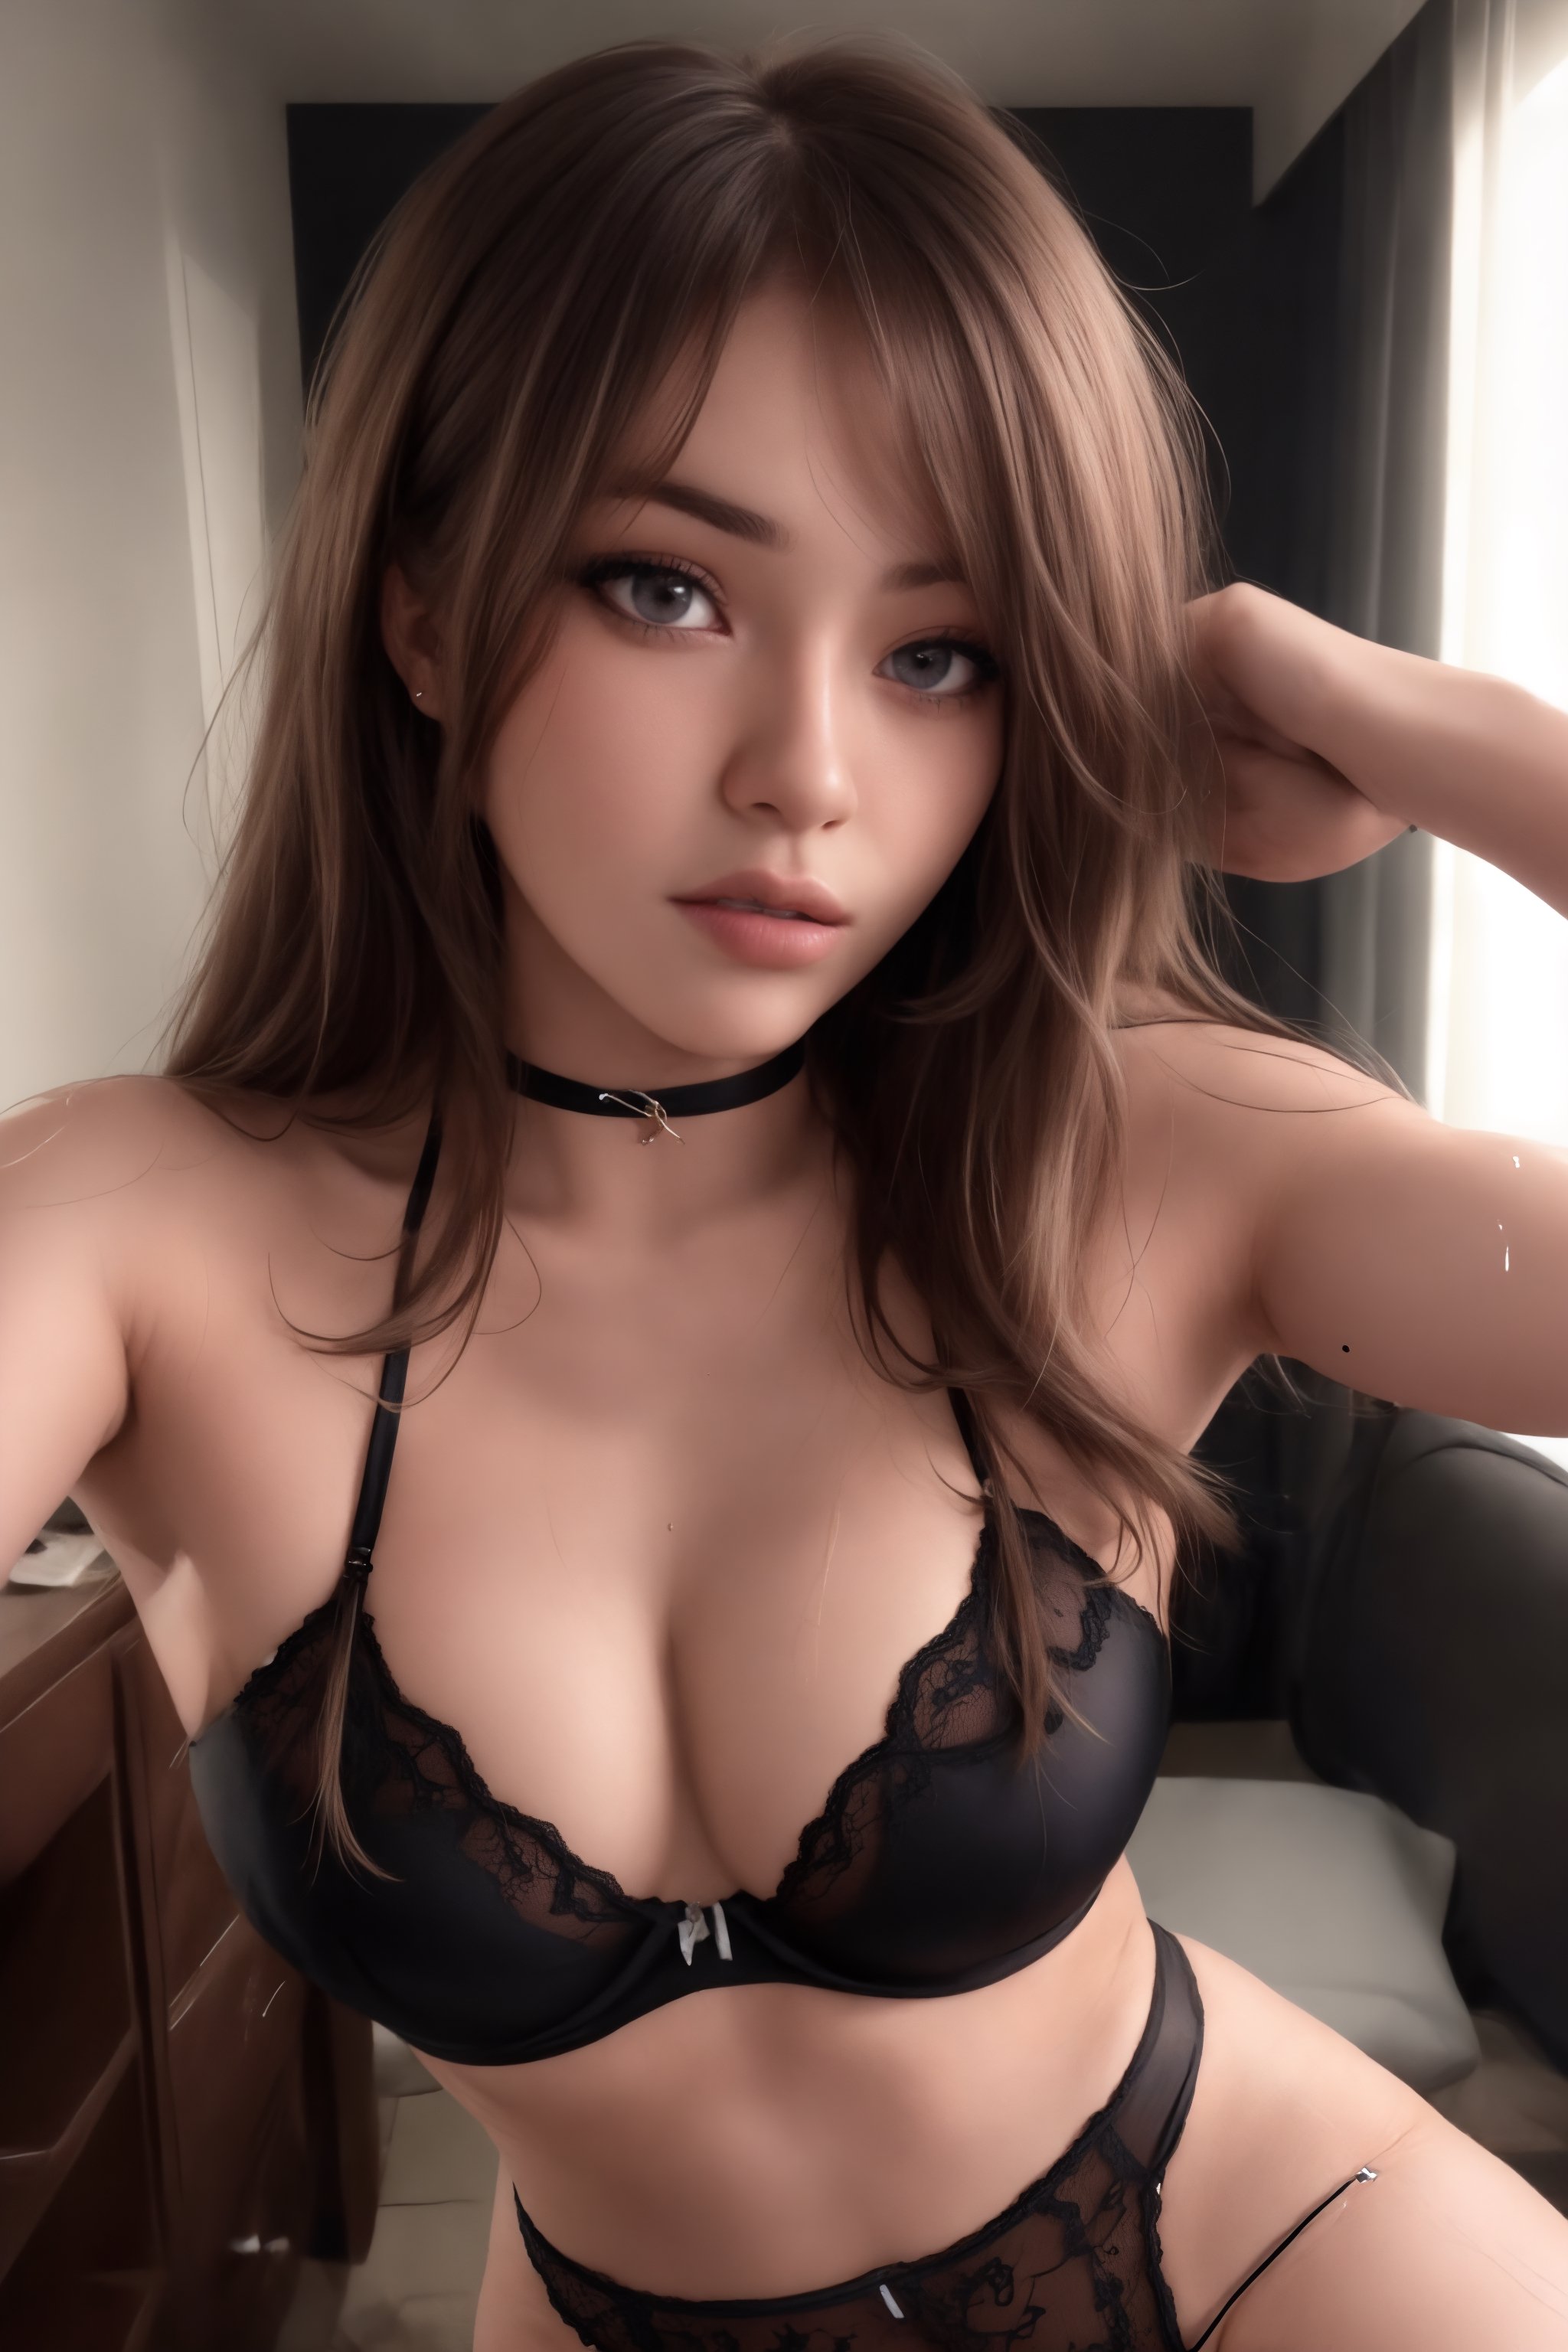  20 year old russian girl, beautiful, model, sexy, horny, seductress, seducing, sensual, long layered blonde hair, long layered hair over breasts and down to waist, long layered bangs that cover partial face,wet clothes, oily skin, realistic skin, realistic, 8k, best quality, horny, orgasm, enhancing breasts and panties. dark background, blue eyes, pink lips, thick lips, sexy lips, glossy lips,  detailed lips, wet lips, detailed eyes, blush, black eye liner, long eye lashes, light tan,sexy lingerie, tiny pink panties, ,pov hands,HeadpatPOV,leashed_pov, sexy lingerie,taaarannn,chakumomi,lora:hyoon_v1:0.8,POV